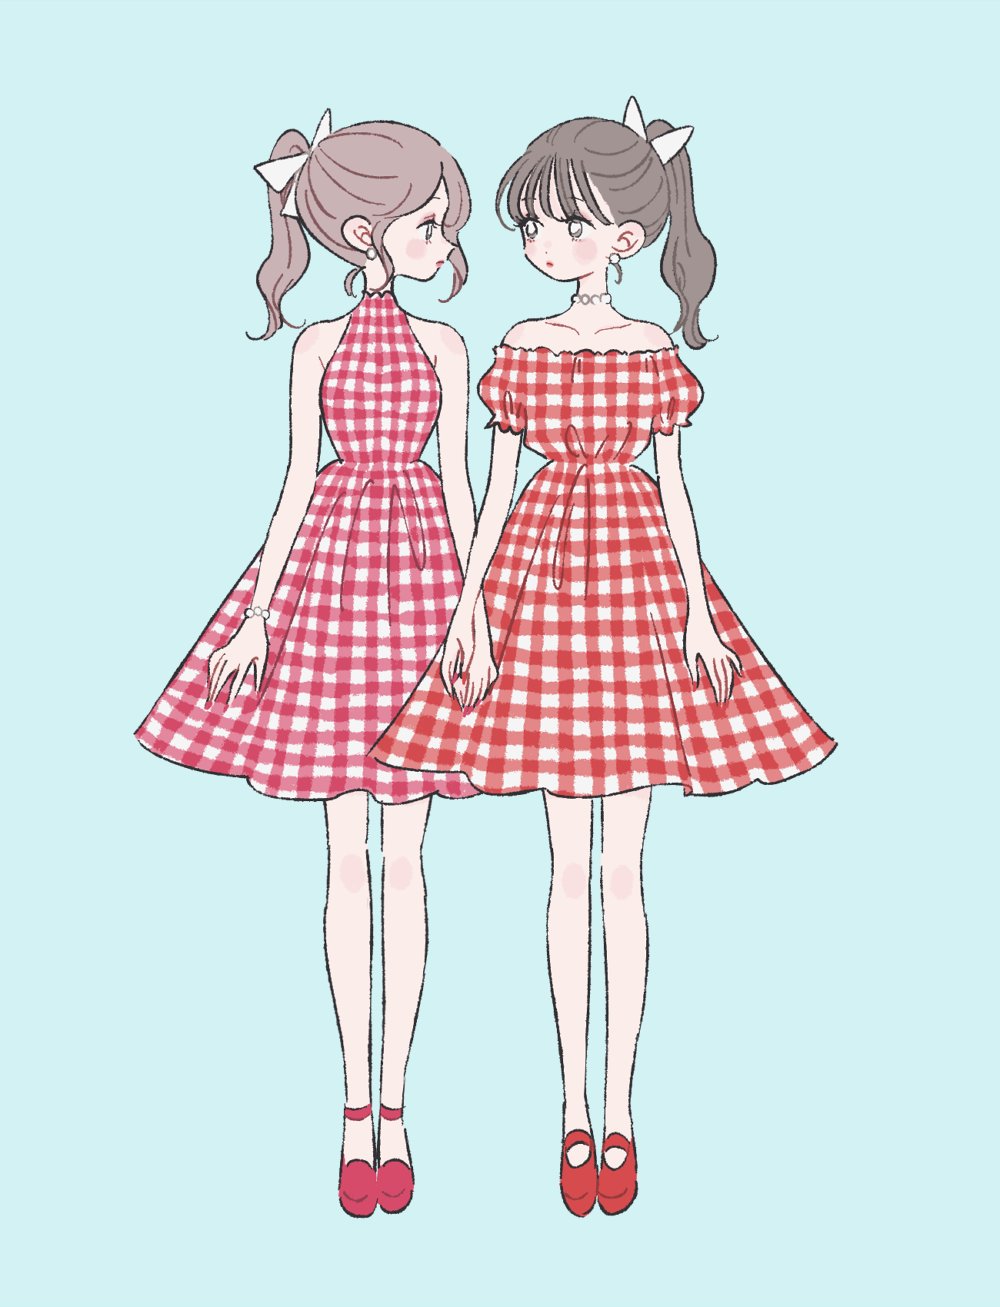 2girls blue_background bow brown_hair color_coordination dress earrings frills gingham gingham_dress hair_bow hairstyle_coordination highres jewelry light_blue_background look-alike mary_janes matching_hairstyle matching_outfit multiple_girls necklace original outfit_connection outfit_coordination pearl_necklace plaid plaid_dress ponytail puffy_short_sleeves puffy_sleeves red_dress red_footwear rikuwo shoes short_sleeves siblings sleeveless sleeveless_dress twins white_bow